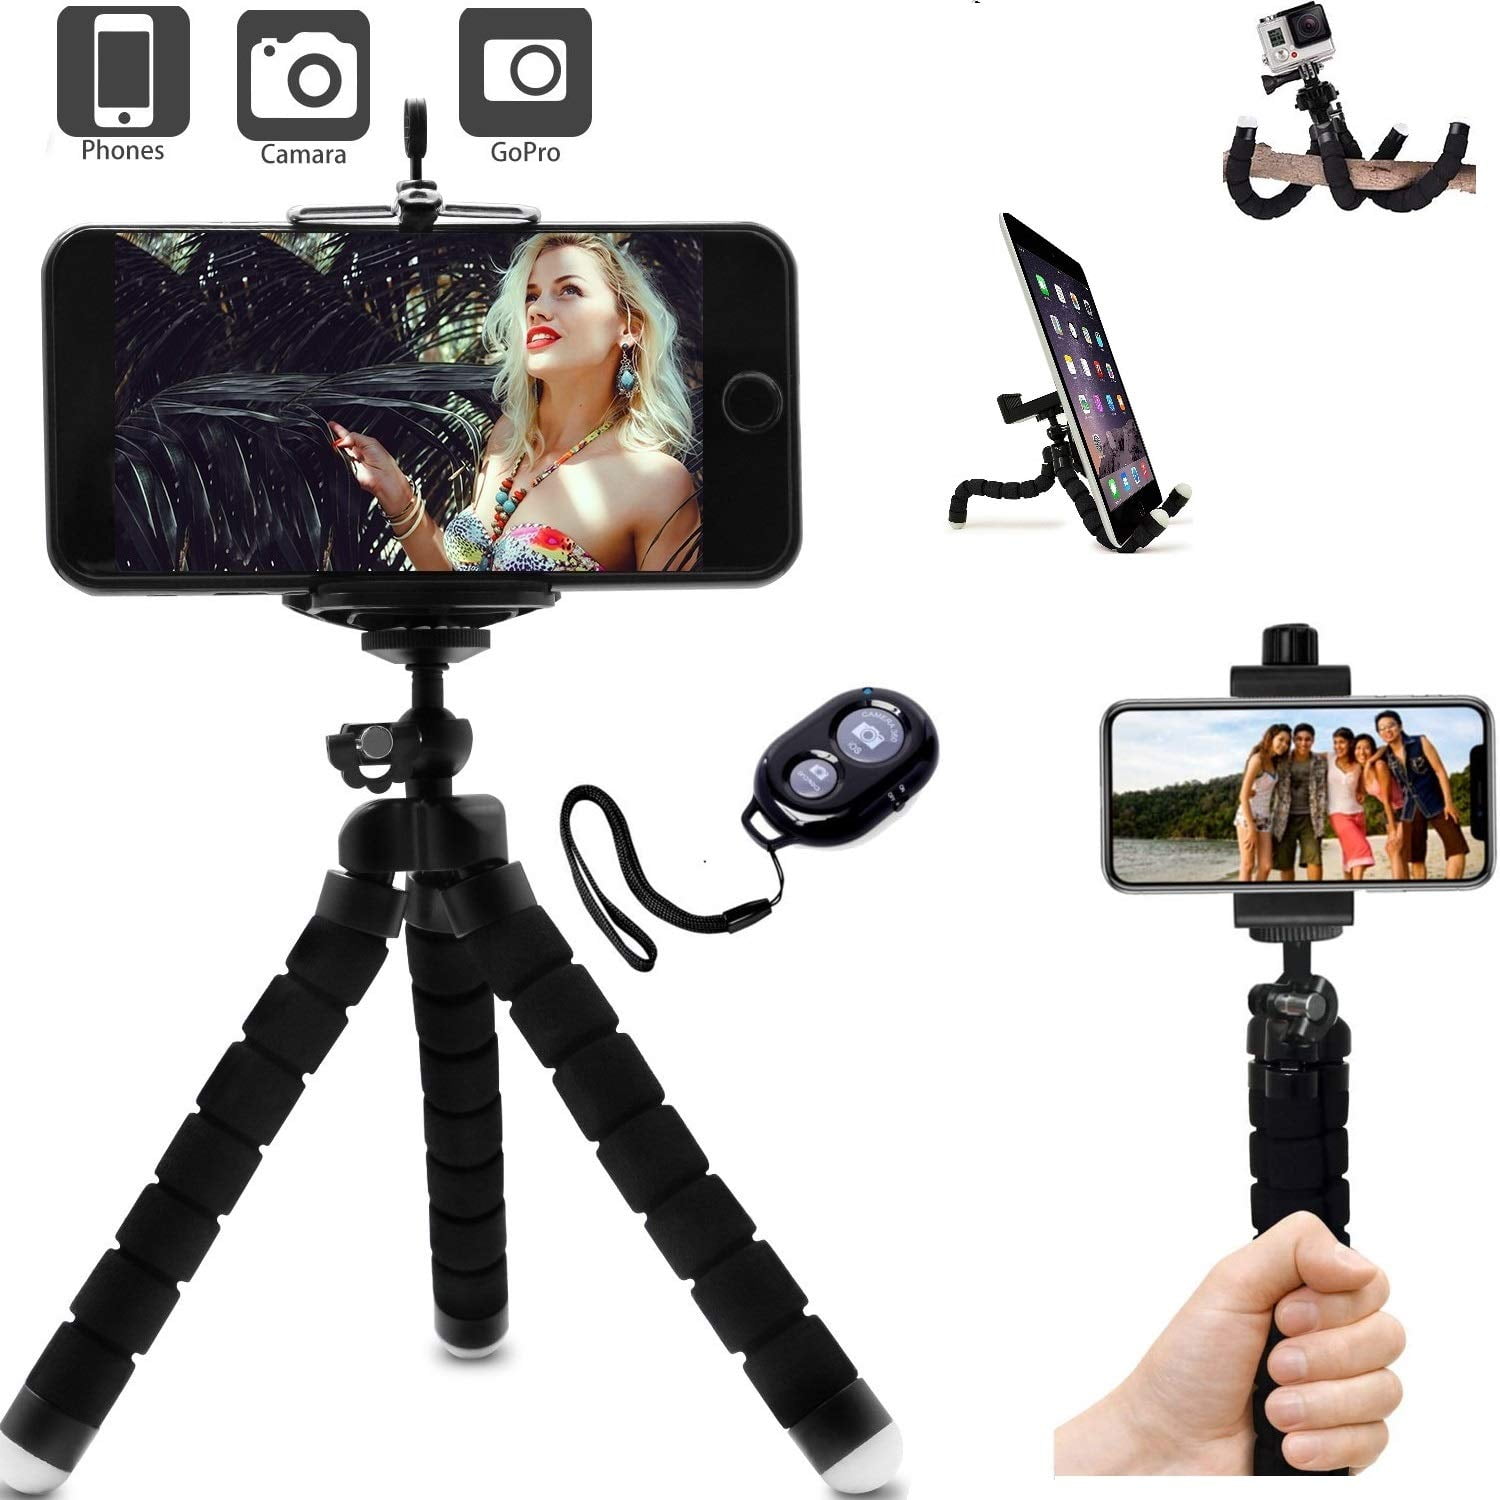 DSLR Camera Sports Camera GoPro Apexel Camera Tripod Compatible with iPhone/Android Samsung iPhone Tripod with Wireless Remote Shutter